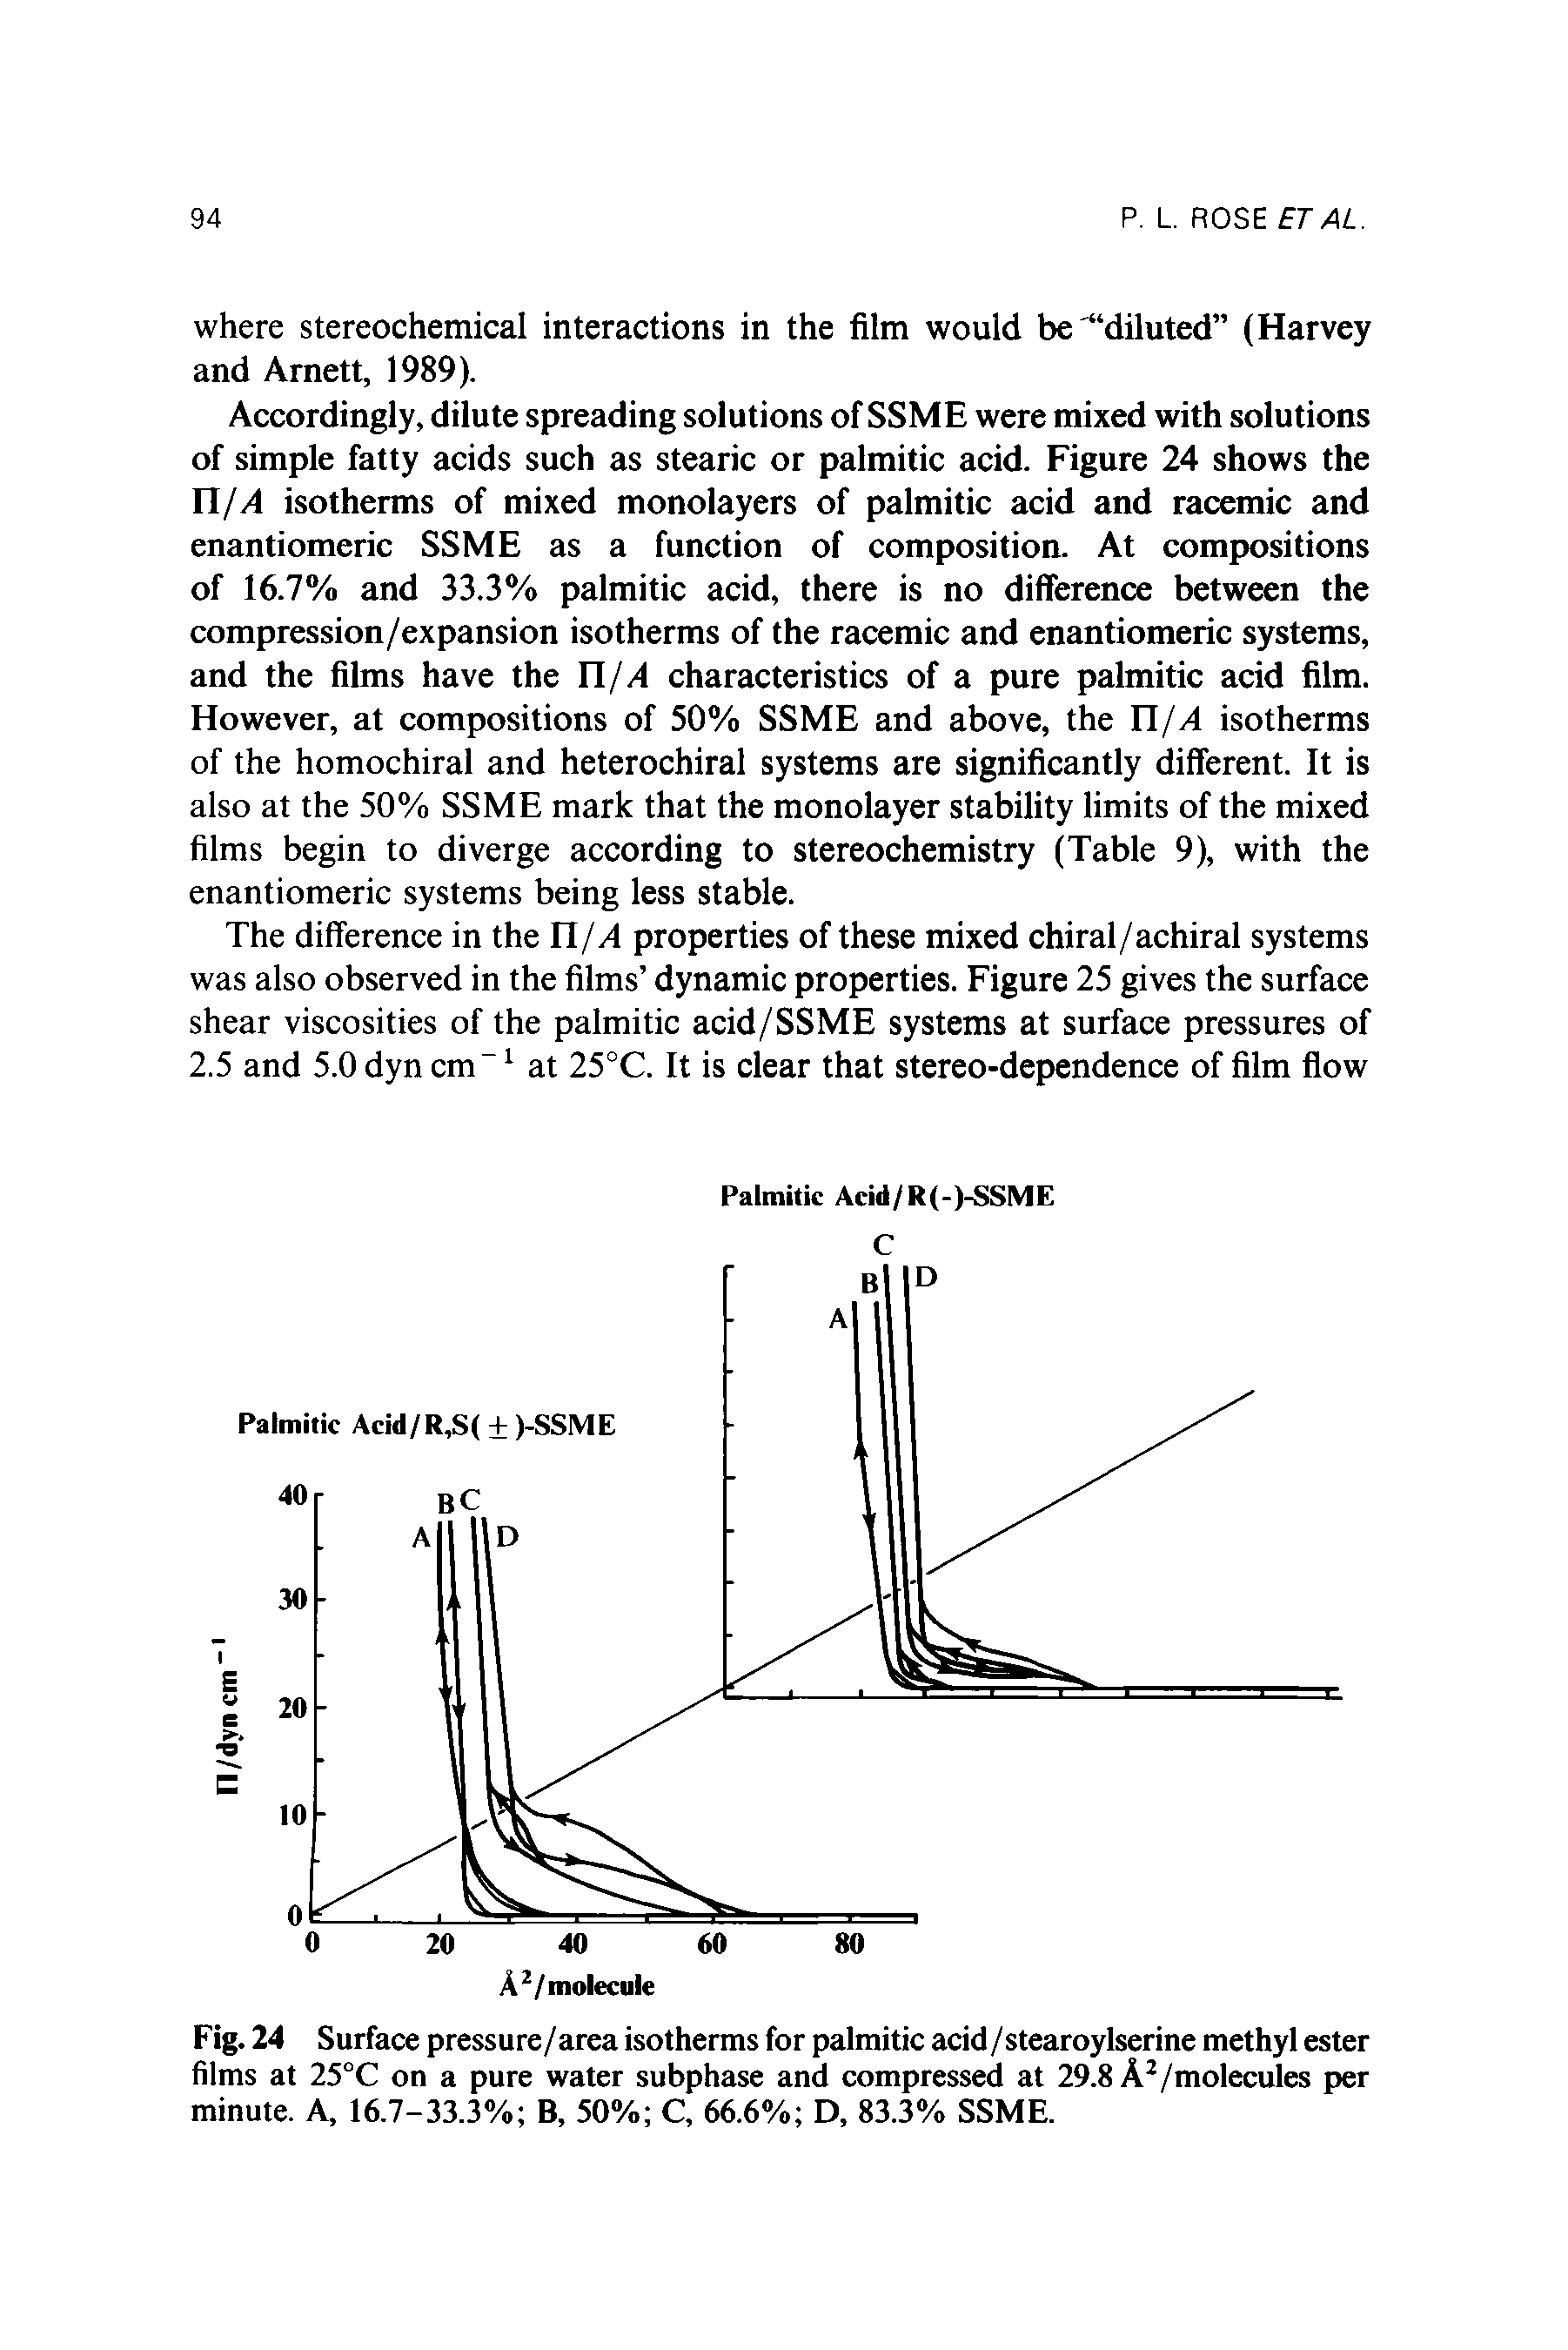 Fig. 24 Surface pressure/area isotherms for palmitic acid/stearoylserine methyl ester films at 25°C on a pure water subphase and compressed at 29.8 A2/molecules per minute. A, 16.7-33.3% B, 50% C, 66.6% D, 83.3% SSME.